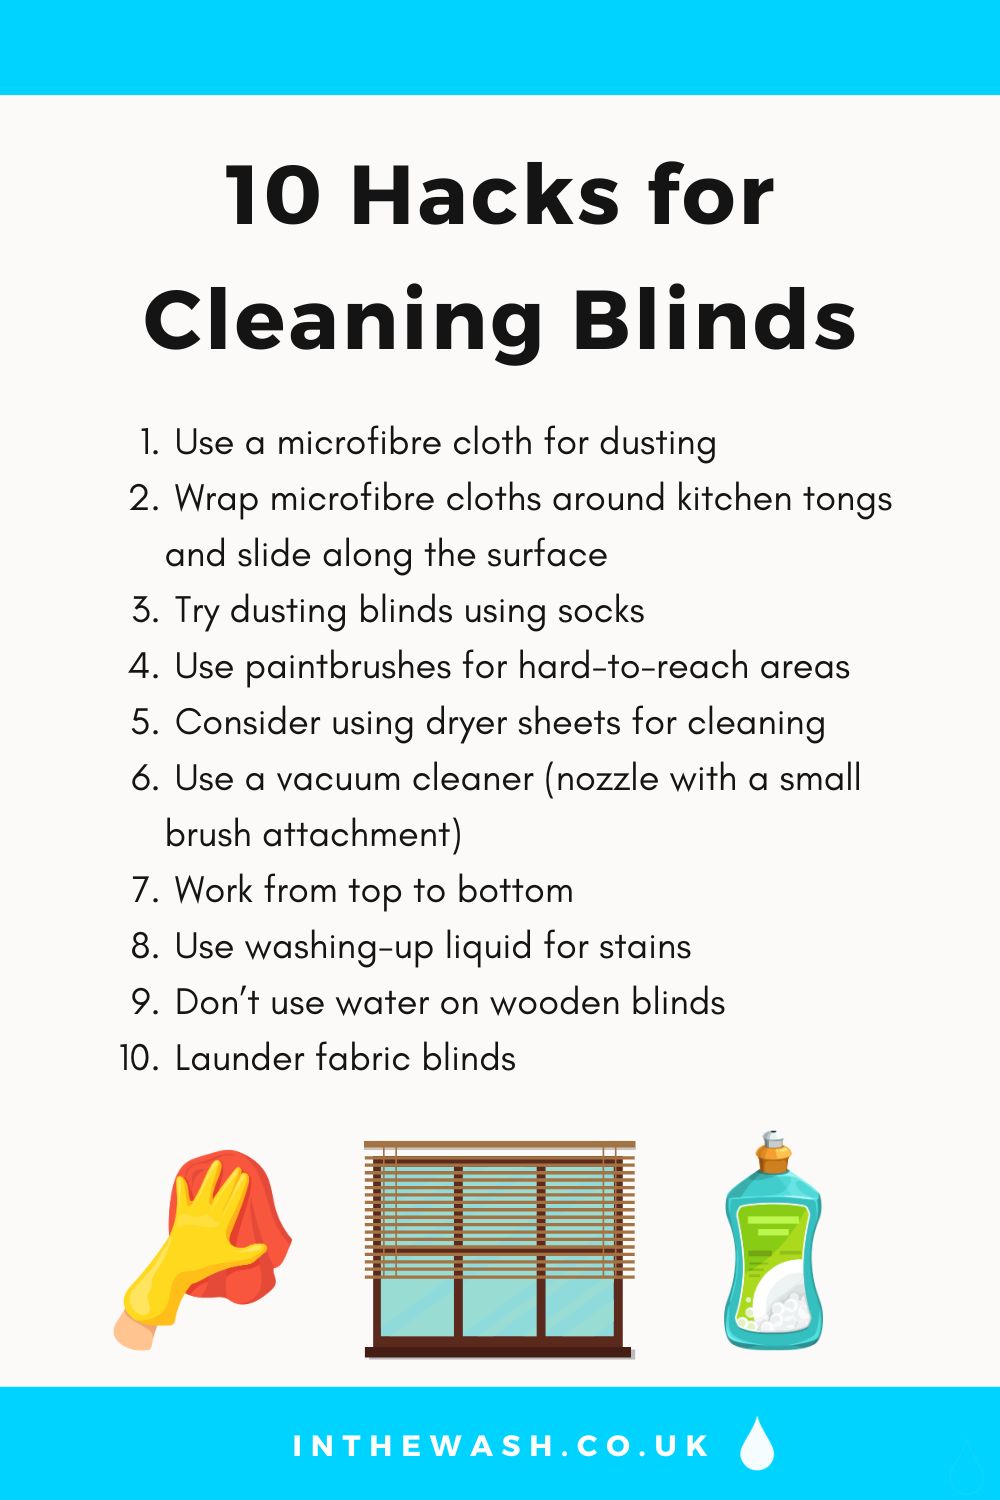 10 Hacks for Cleaning Blinds